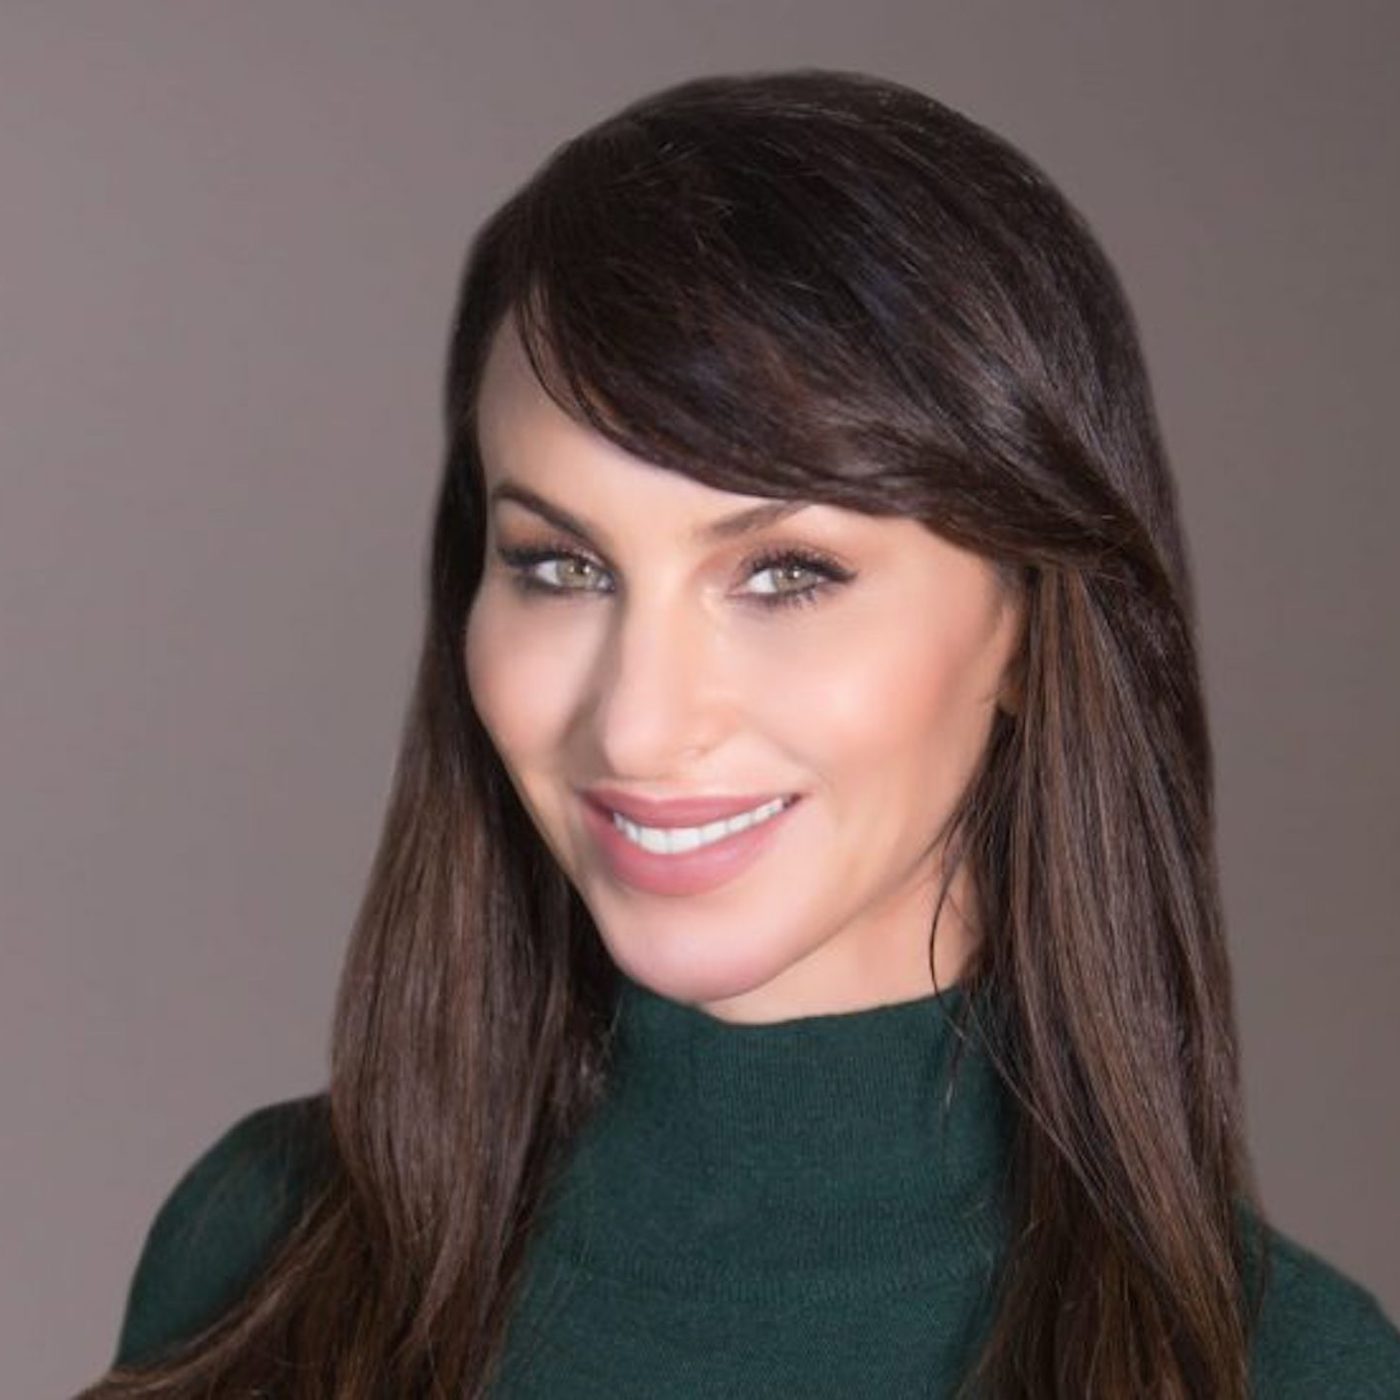 Molly Bloom Molly S Game Constructive Suffering Sobriety And Tools